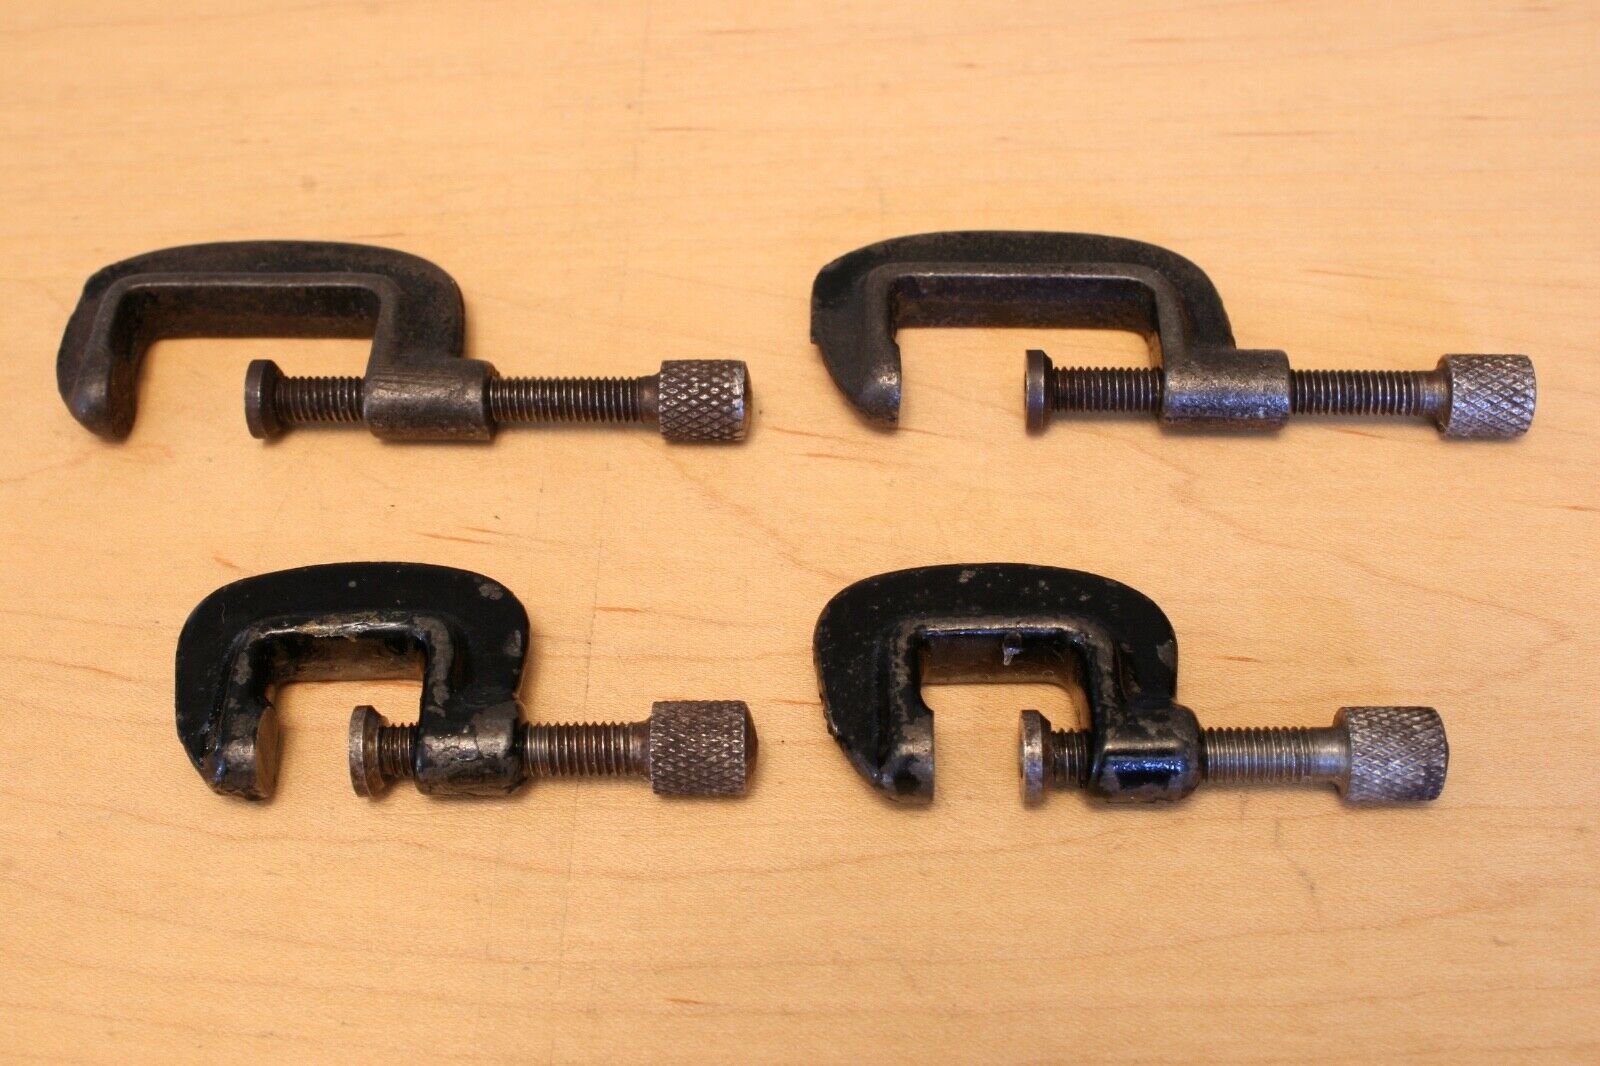 Rare Vintage Set Of Miniature Heavy Duty Steel Clamps, Toolmakers, Model Makers